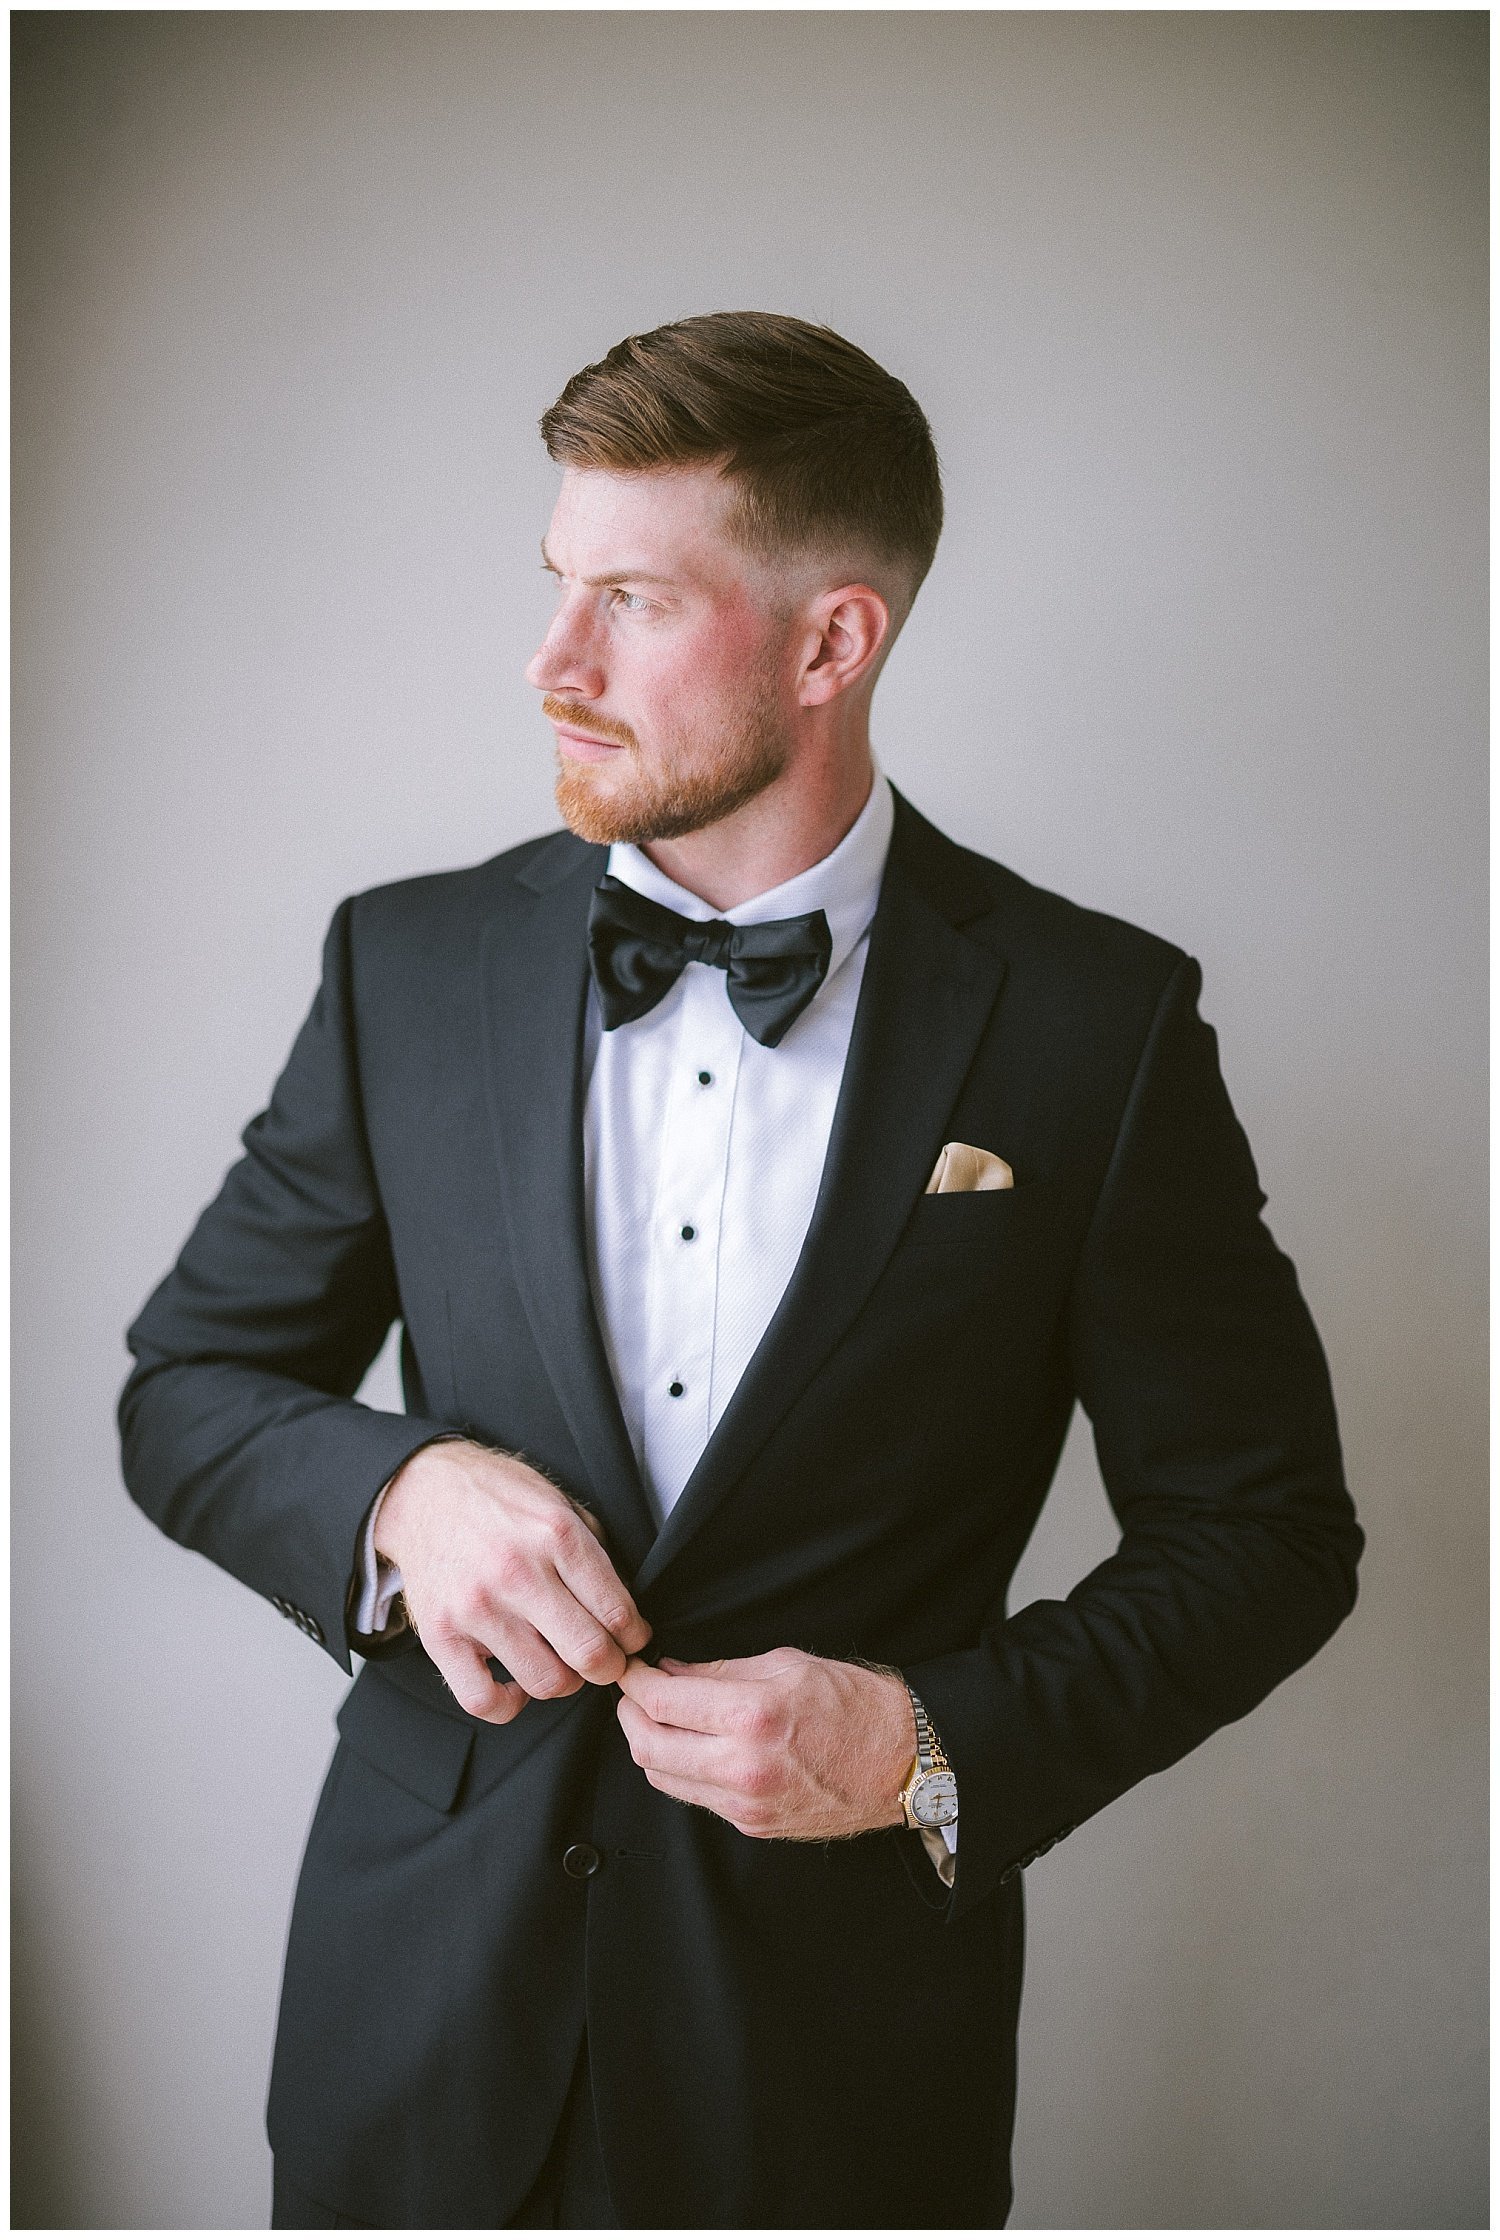 closeup photo of a groom buttoning his suit jacket